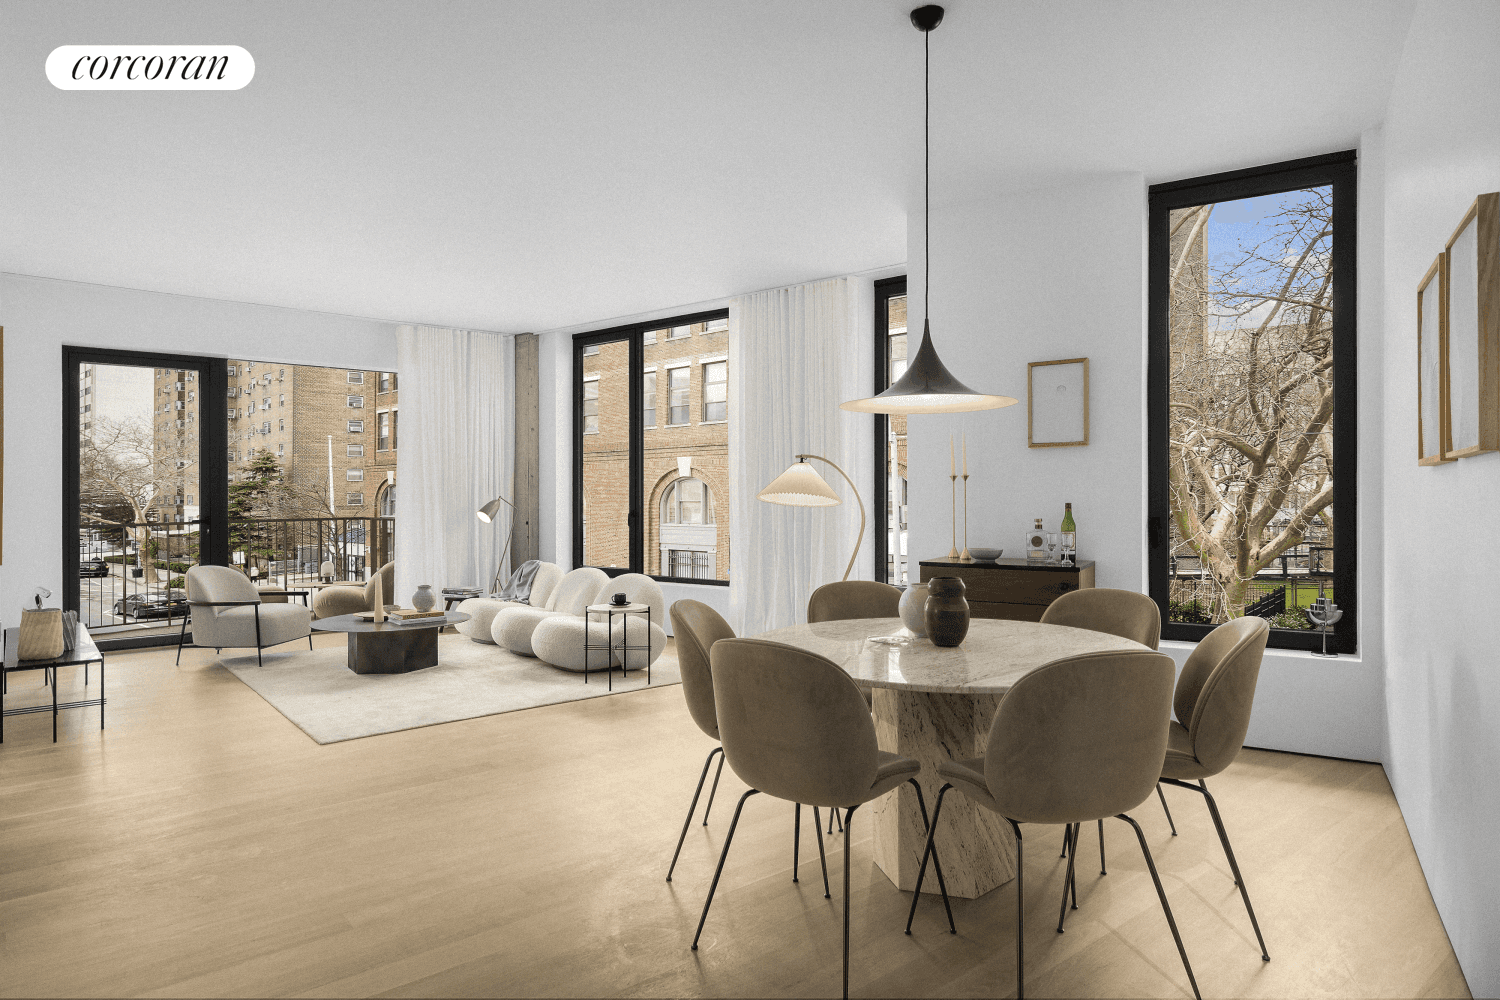 Welcome to Nine Chapel Street, a stunning new architectural landmark at the crossroads of Brooklyn Heights, Downtown Brooklyn, and Dumbo, and moments from Fort Greene and the surrounding neighborhoods.